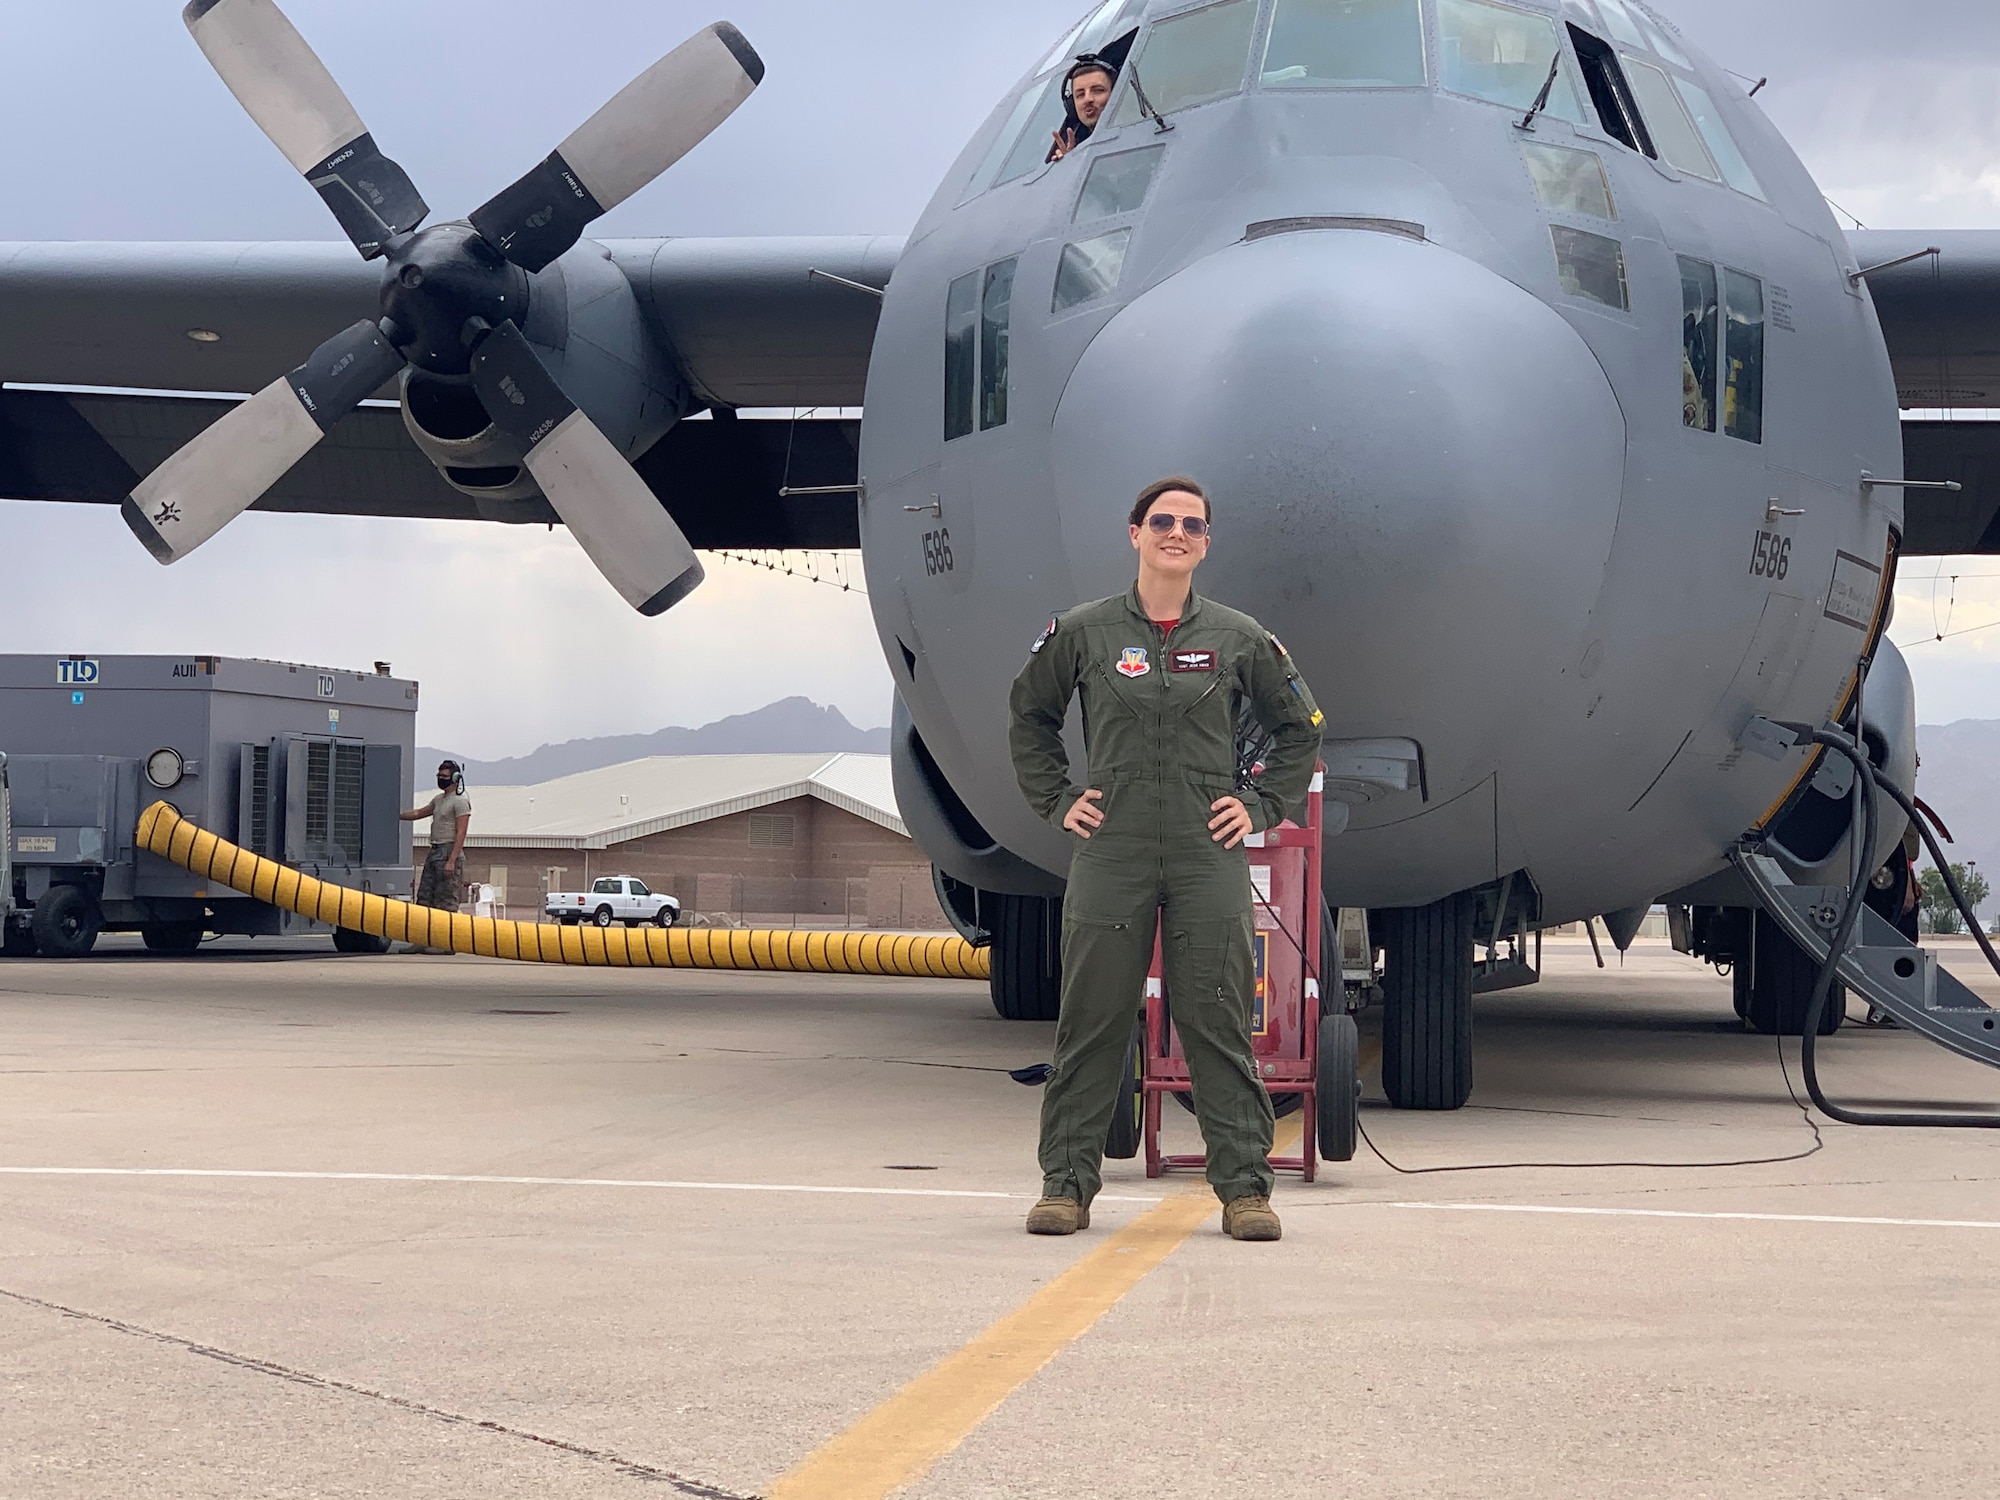 U.S. Air Force Master Sergeant Jessica Abad stands in front of the EC-130H Compass Call at Davis-Monthan Air Force Base, Arizona. Previously, Abad was assigned to Davis-Monthan, where she flew on the EC-130H. (Courtesy Photo)